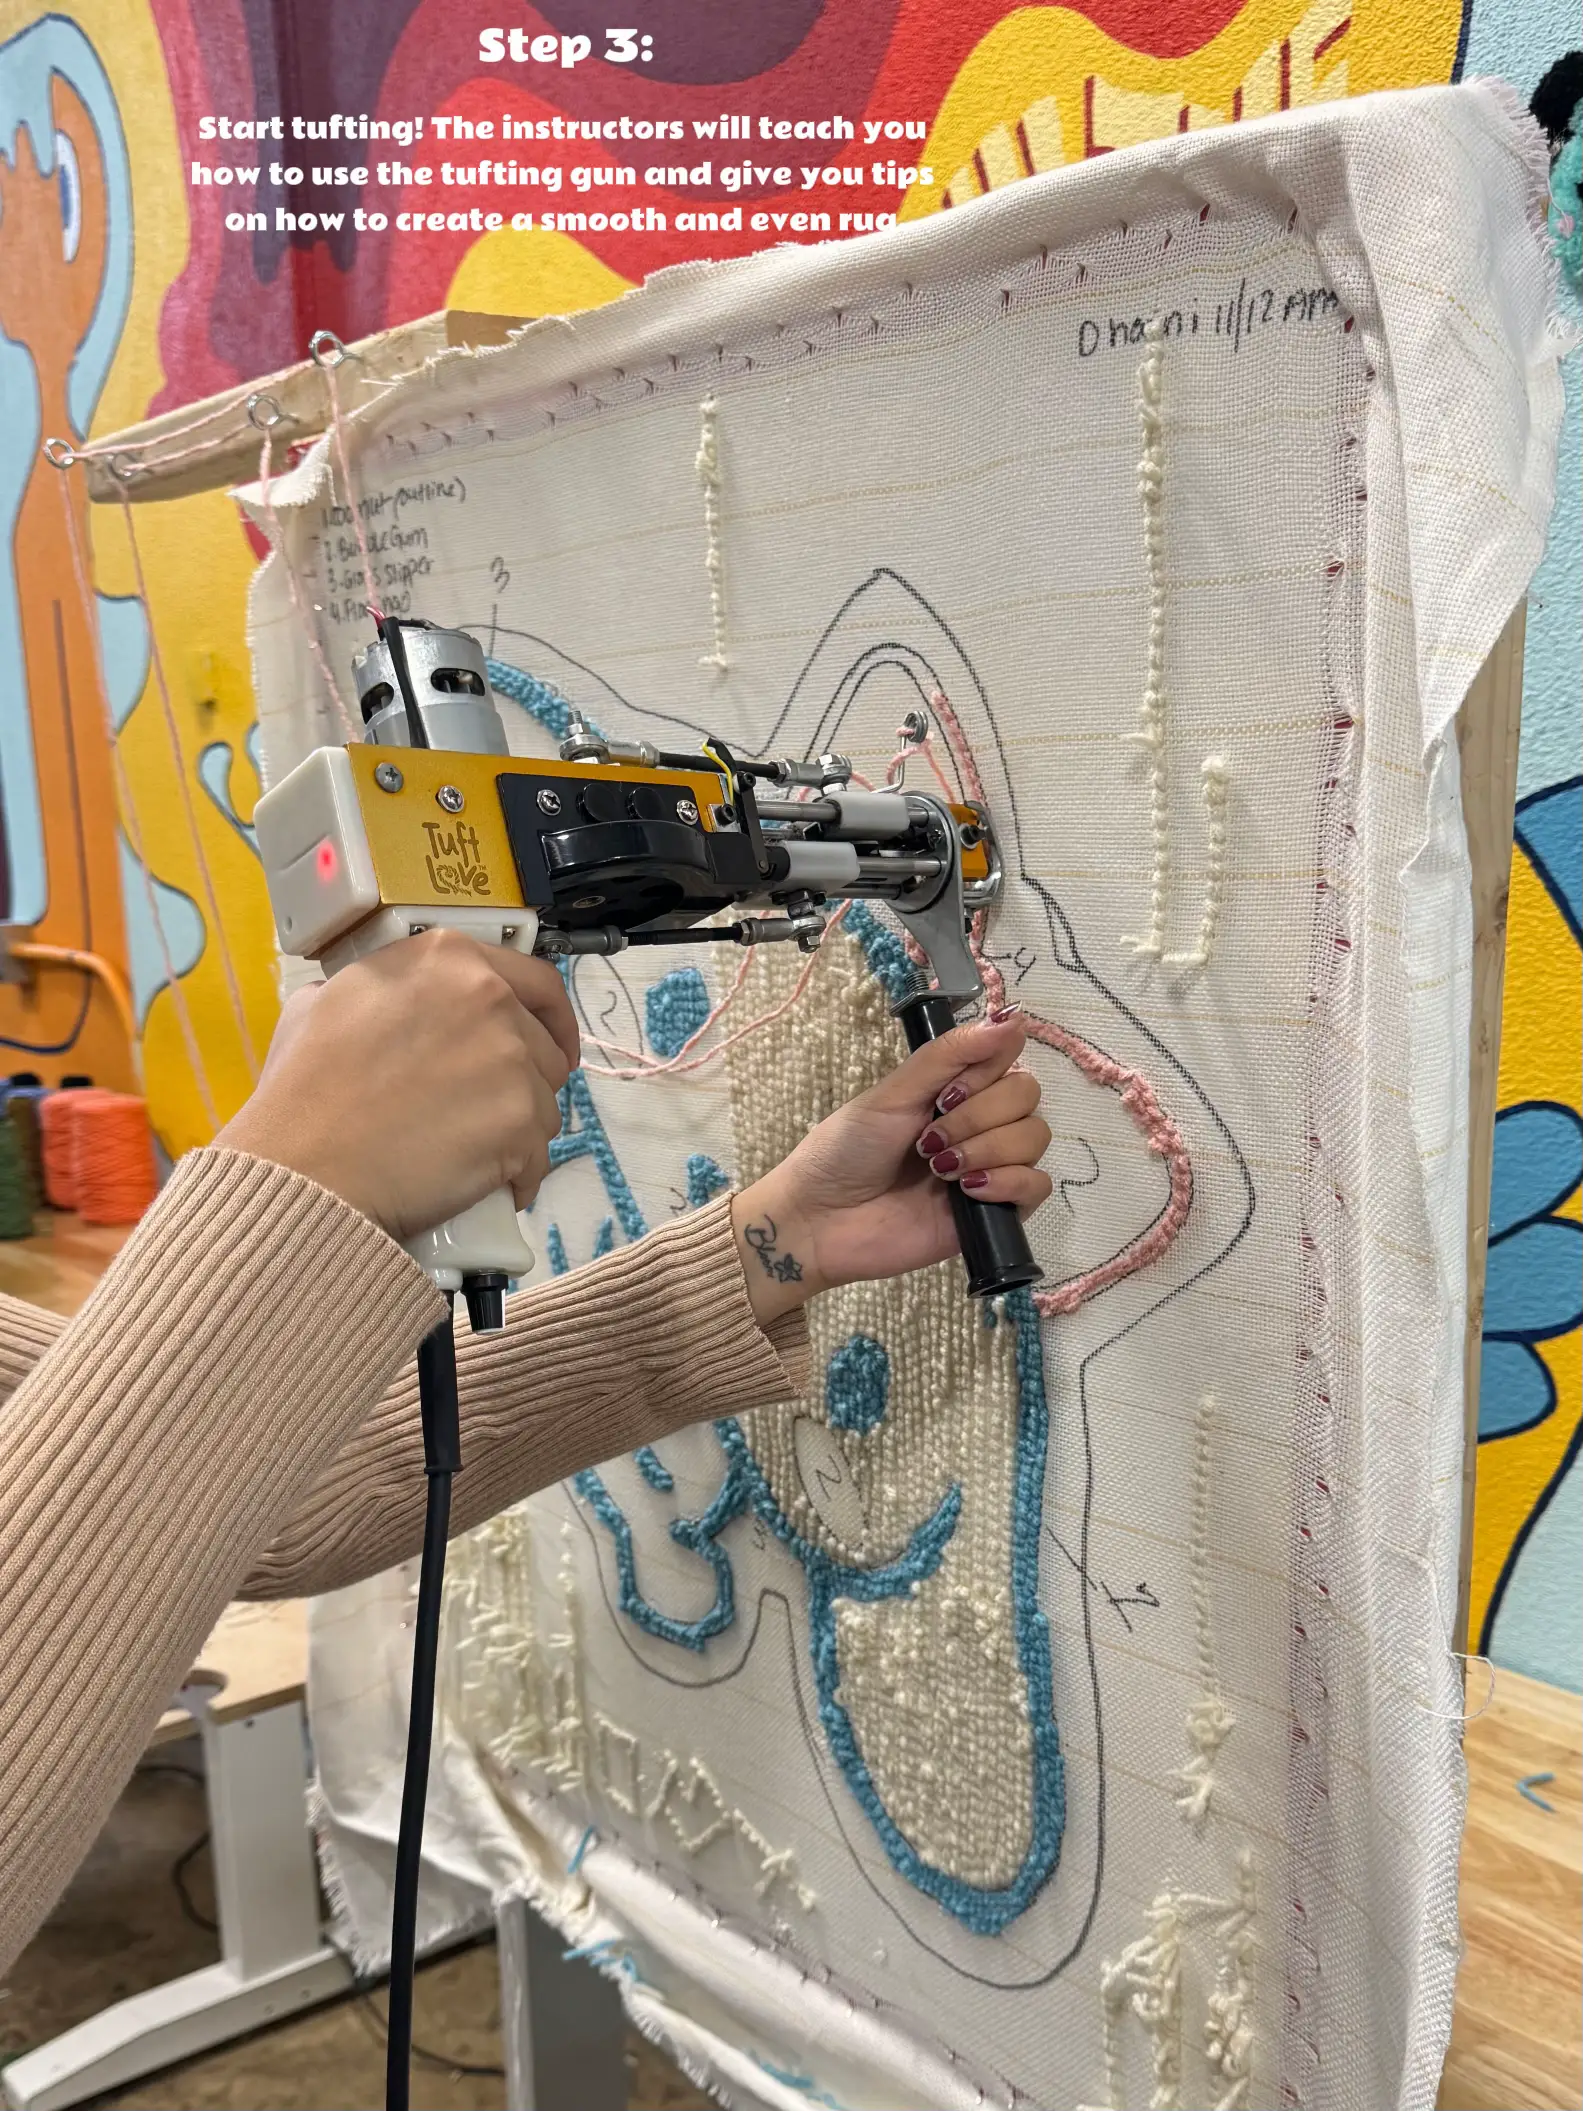 Online Course - Tufting-Gun Tapestry with Felt and Embroidery